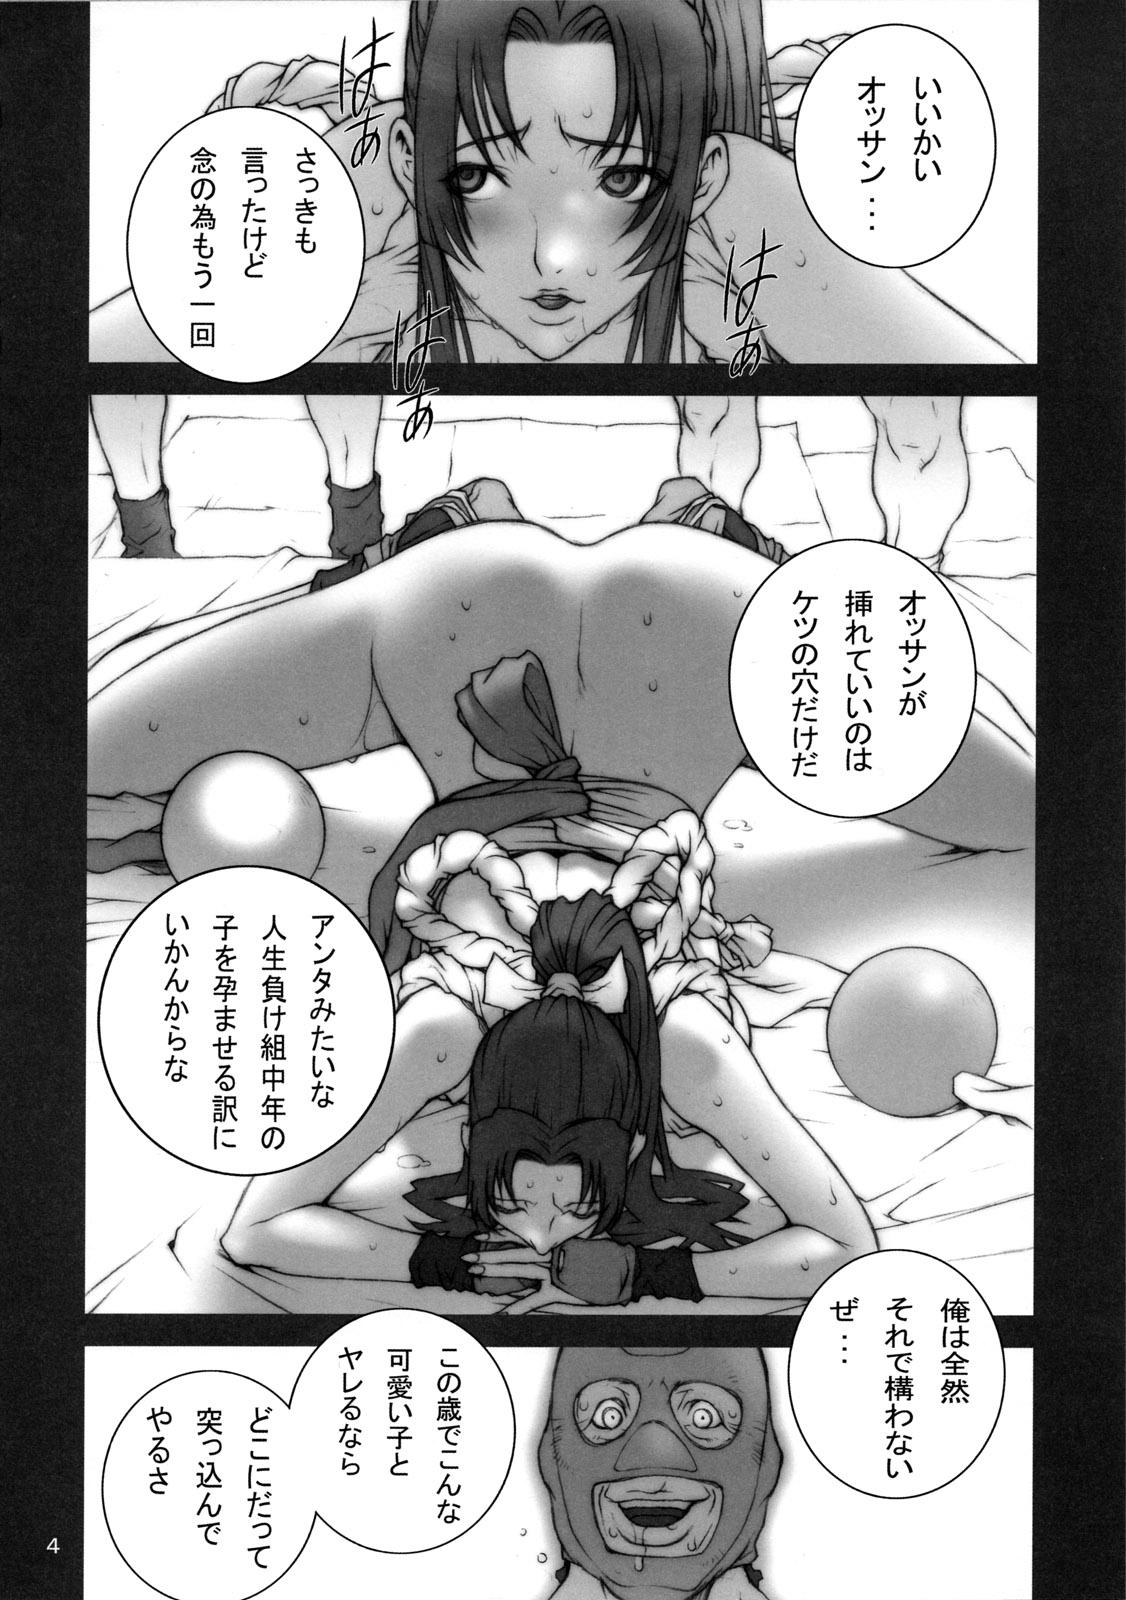  Tou San - King of fighters Imvu - Page 6